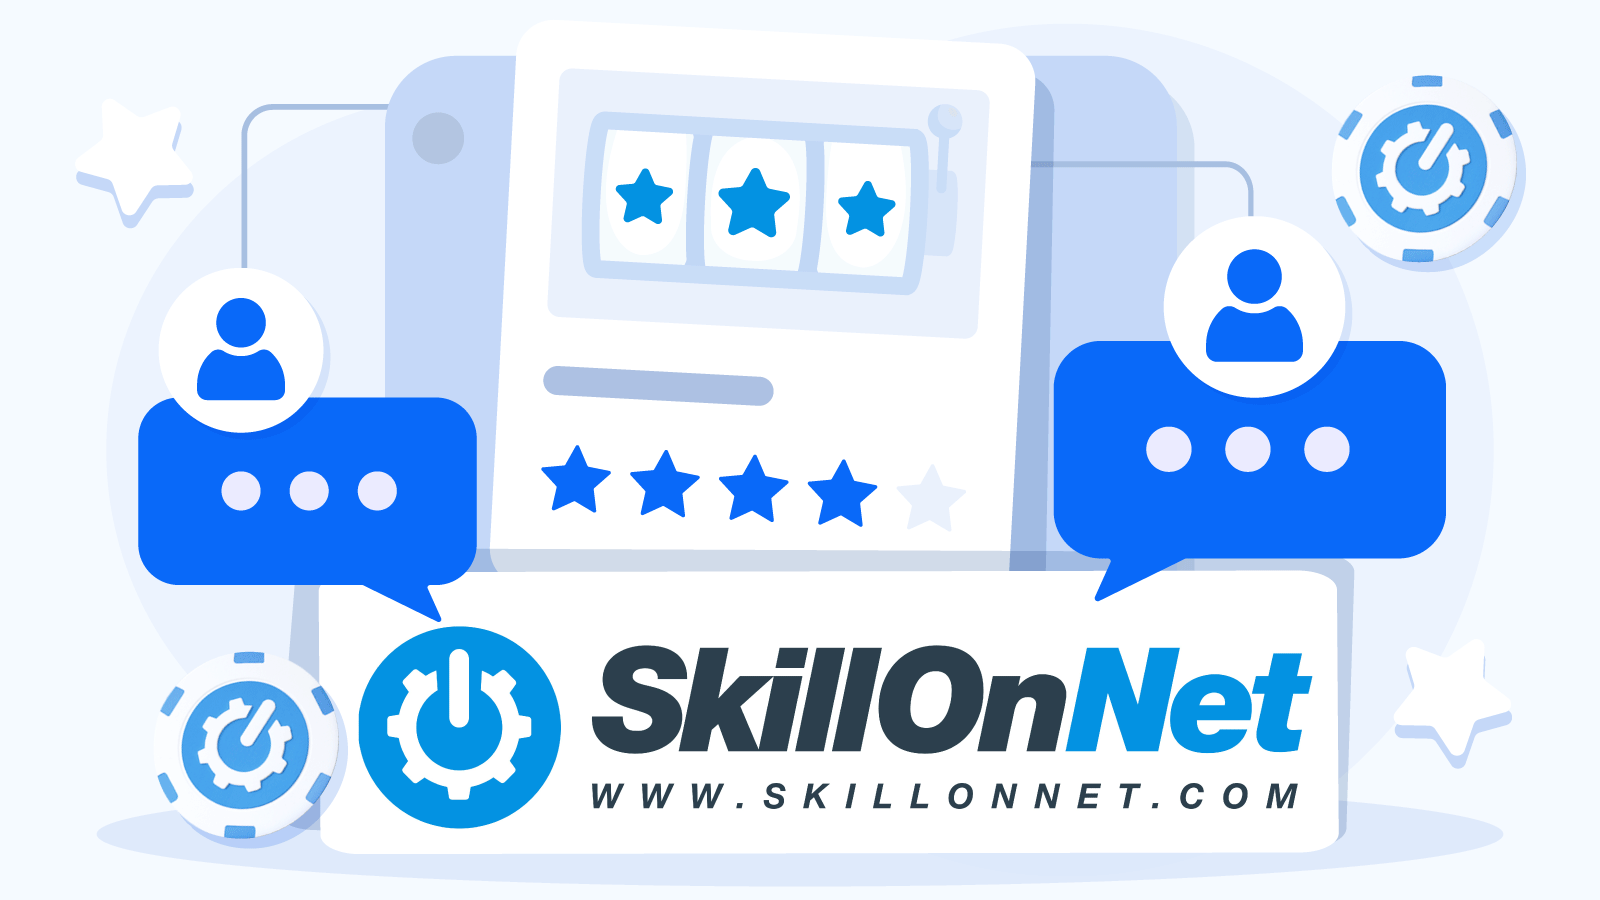 What Users Say About SkillOnNet